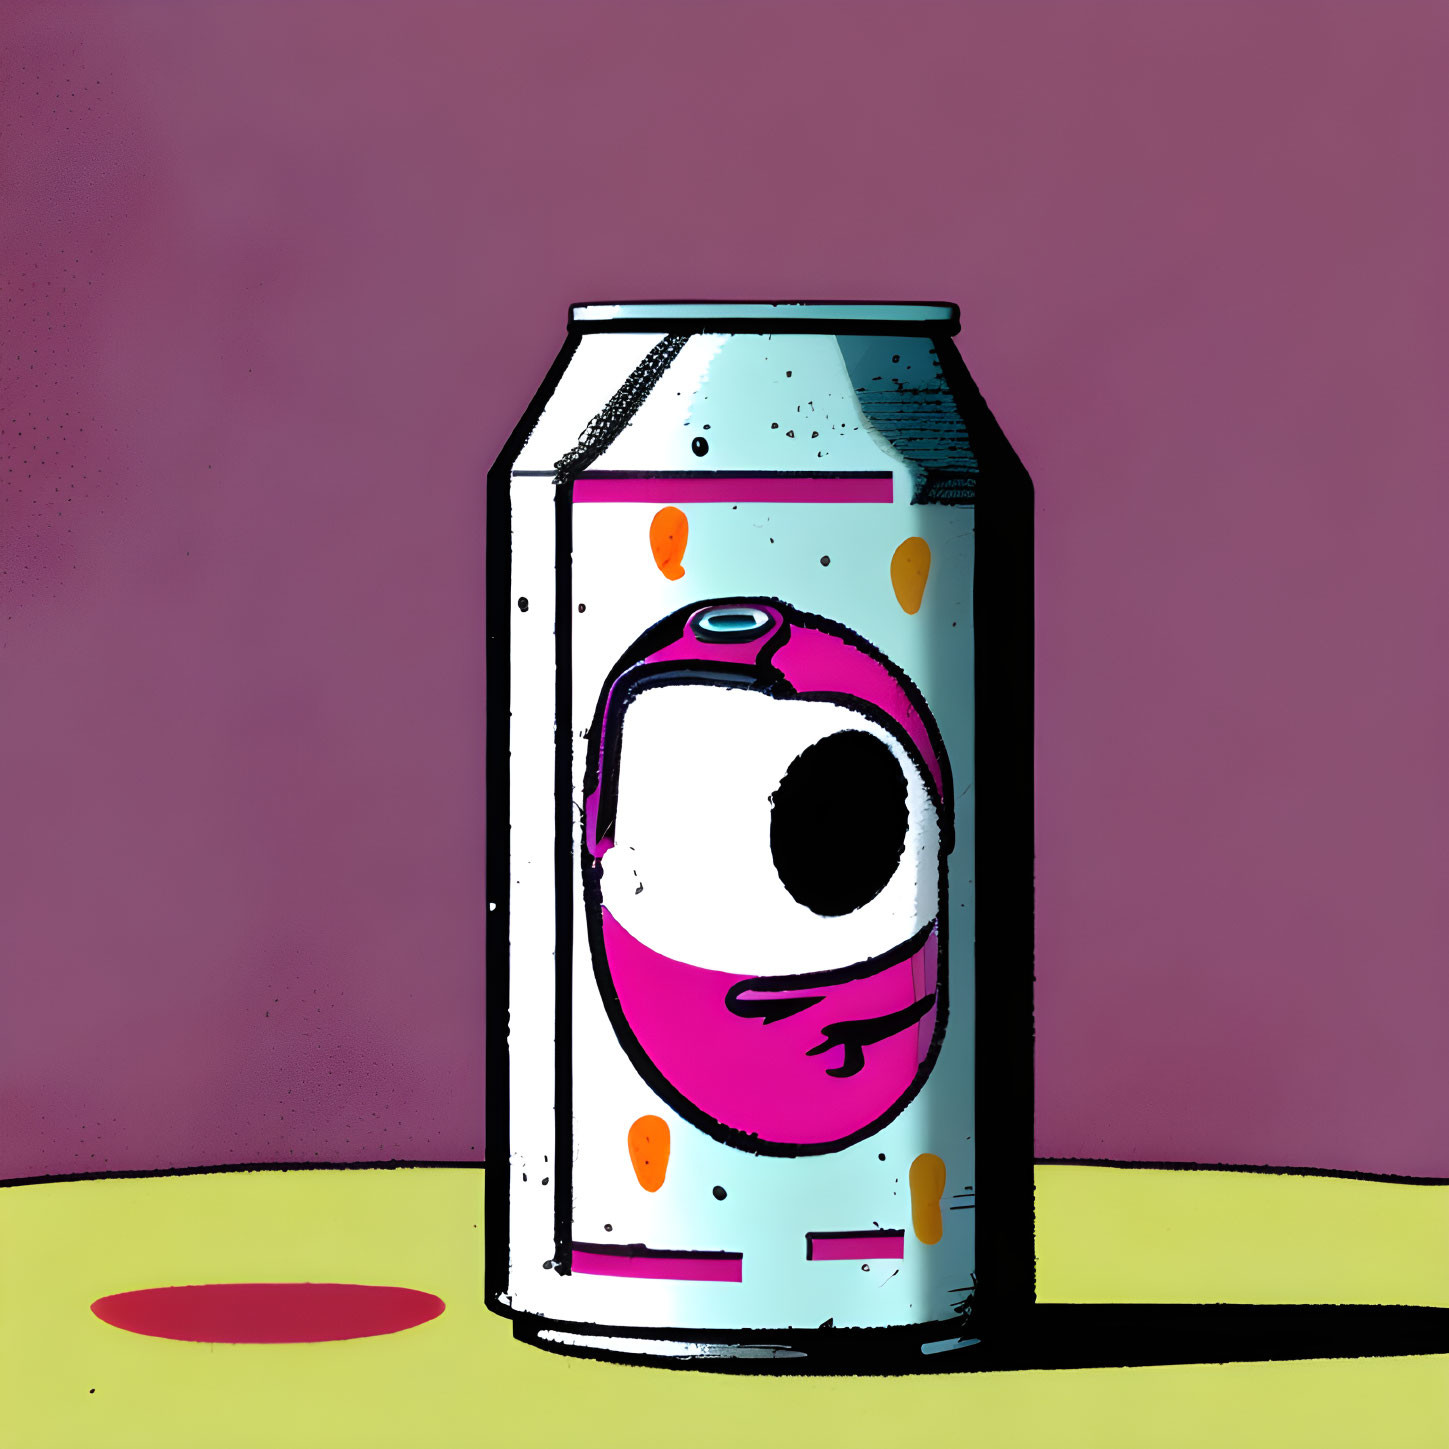 Stylized eye design on soda can label, purple background, yellow surface